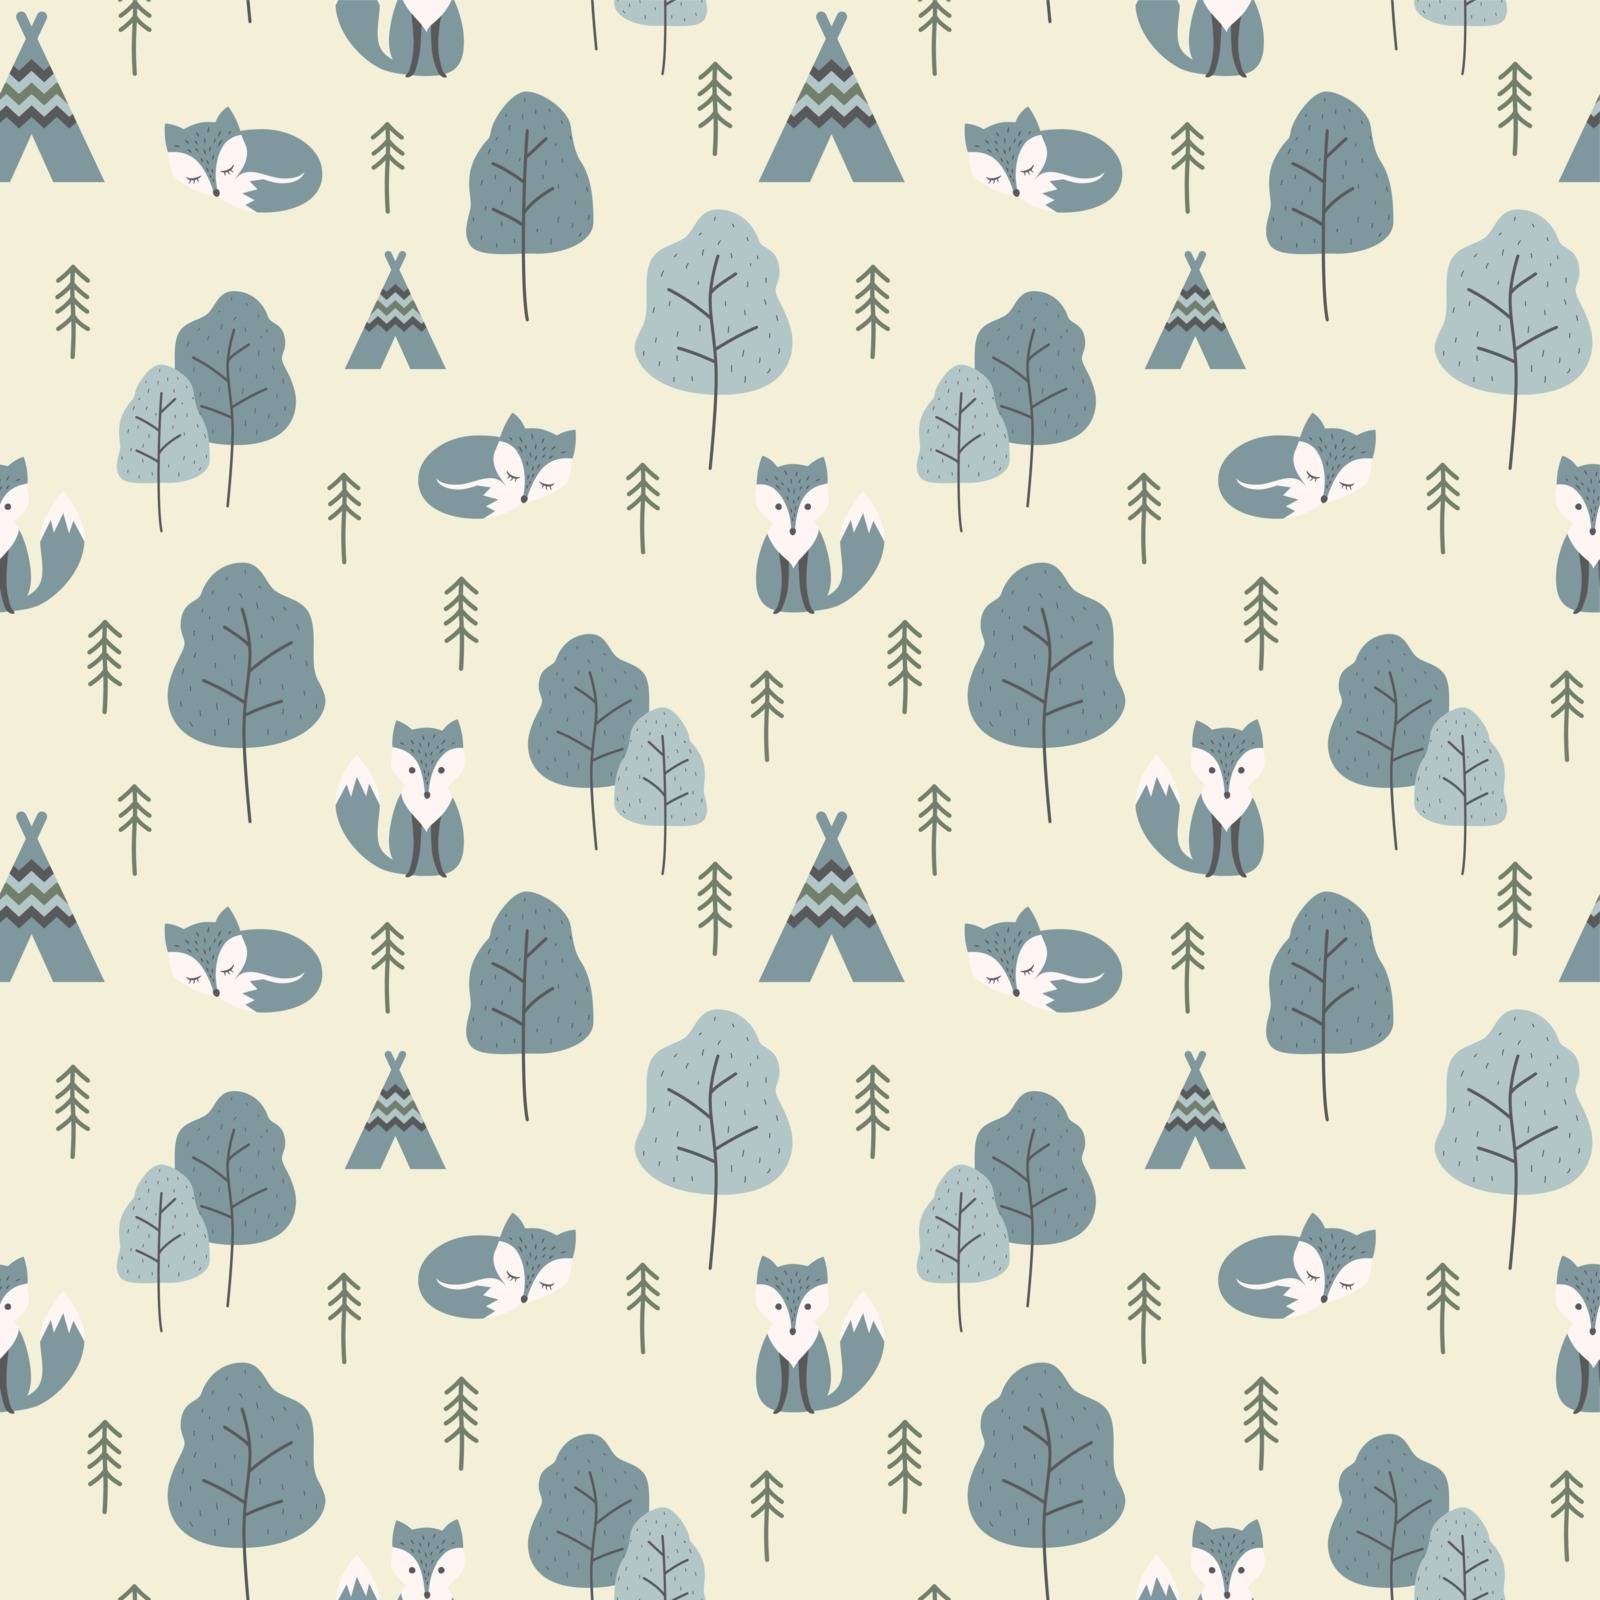 Arctic fox and trees colorful seamless pattern by cveivn